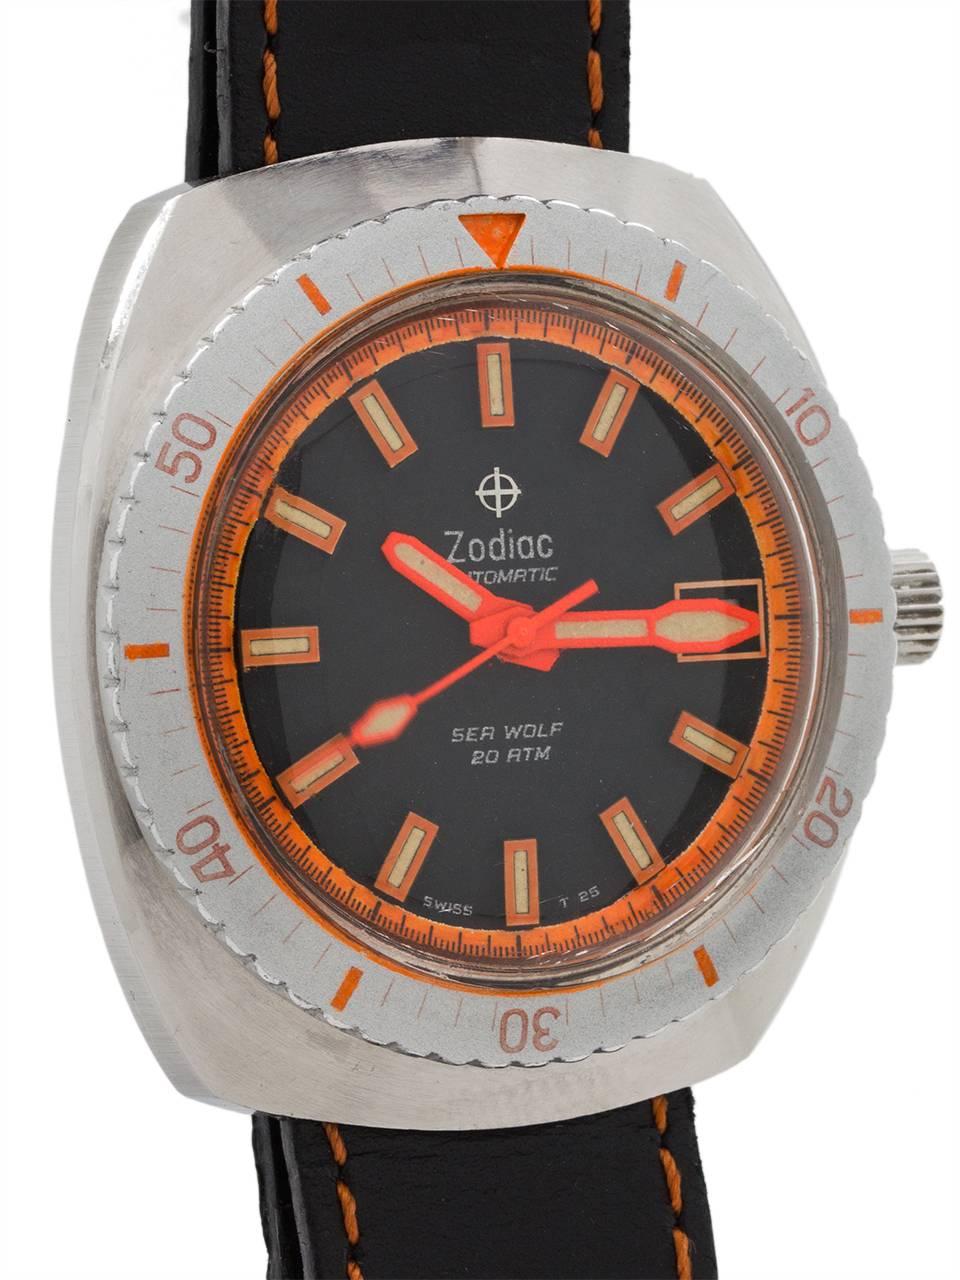 
An extremely nice condition example vintage Zodiac Sea Wolf, classic diver’s model circa 1970’s. Featuring large 43.5mm tonneau shaped case with screw down back and correct Zodiac cross hair screw crown. With silver and orange elapsed time bezel,